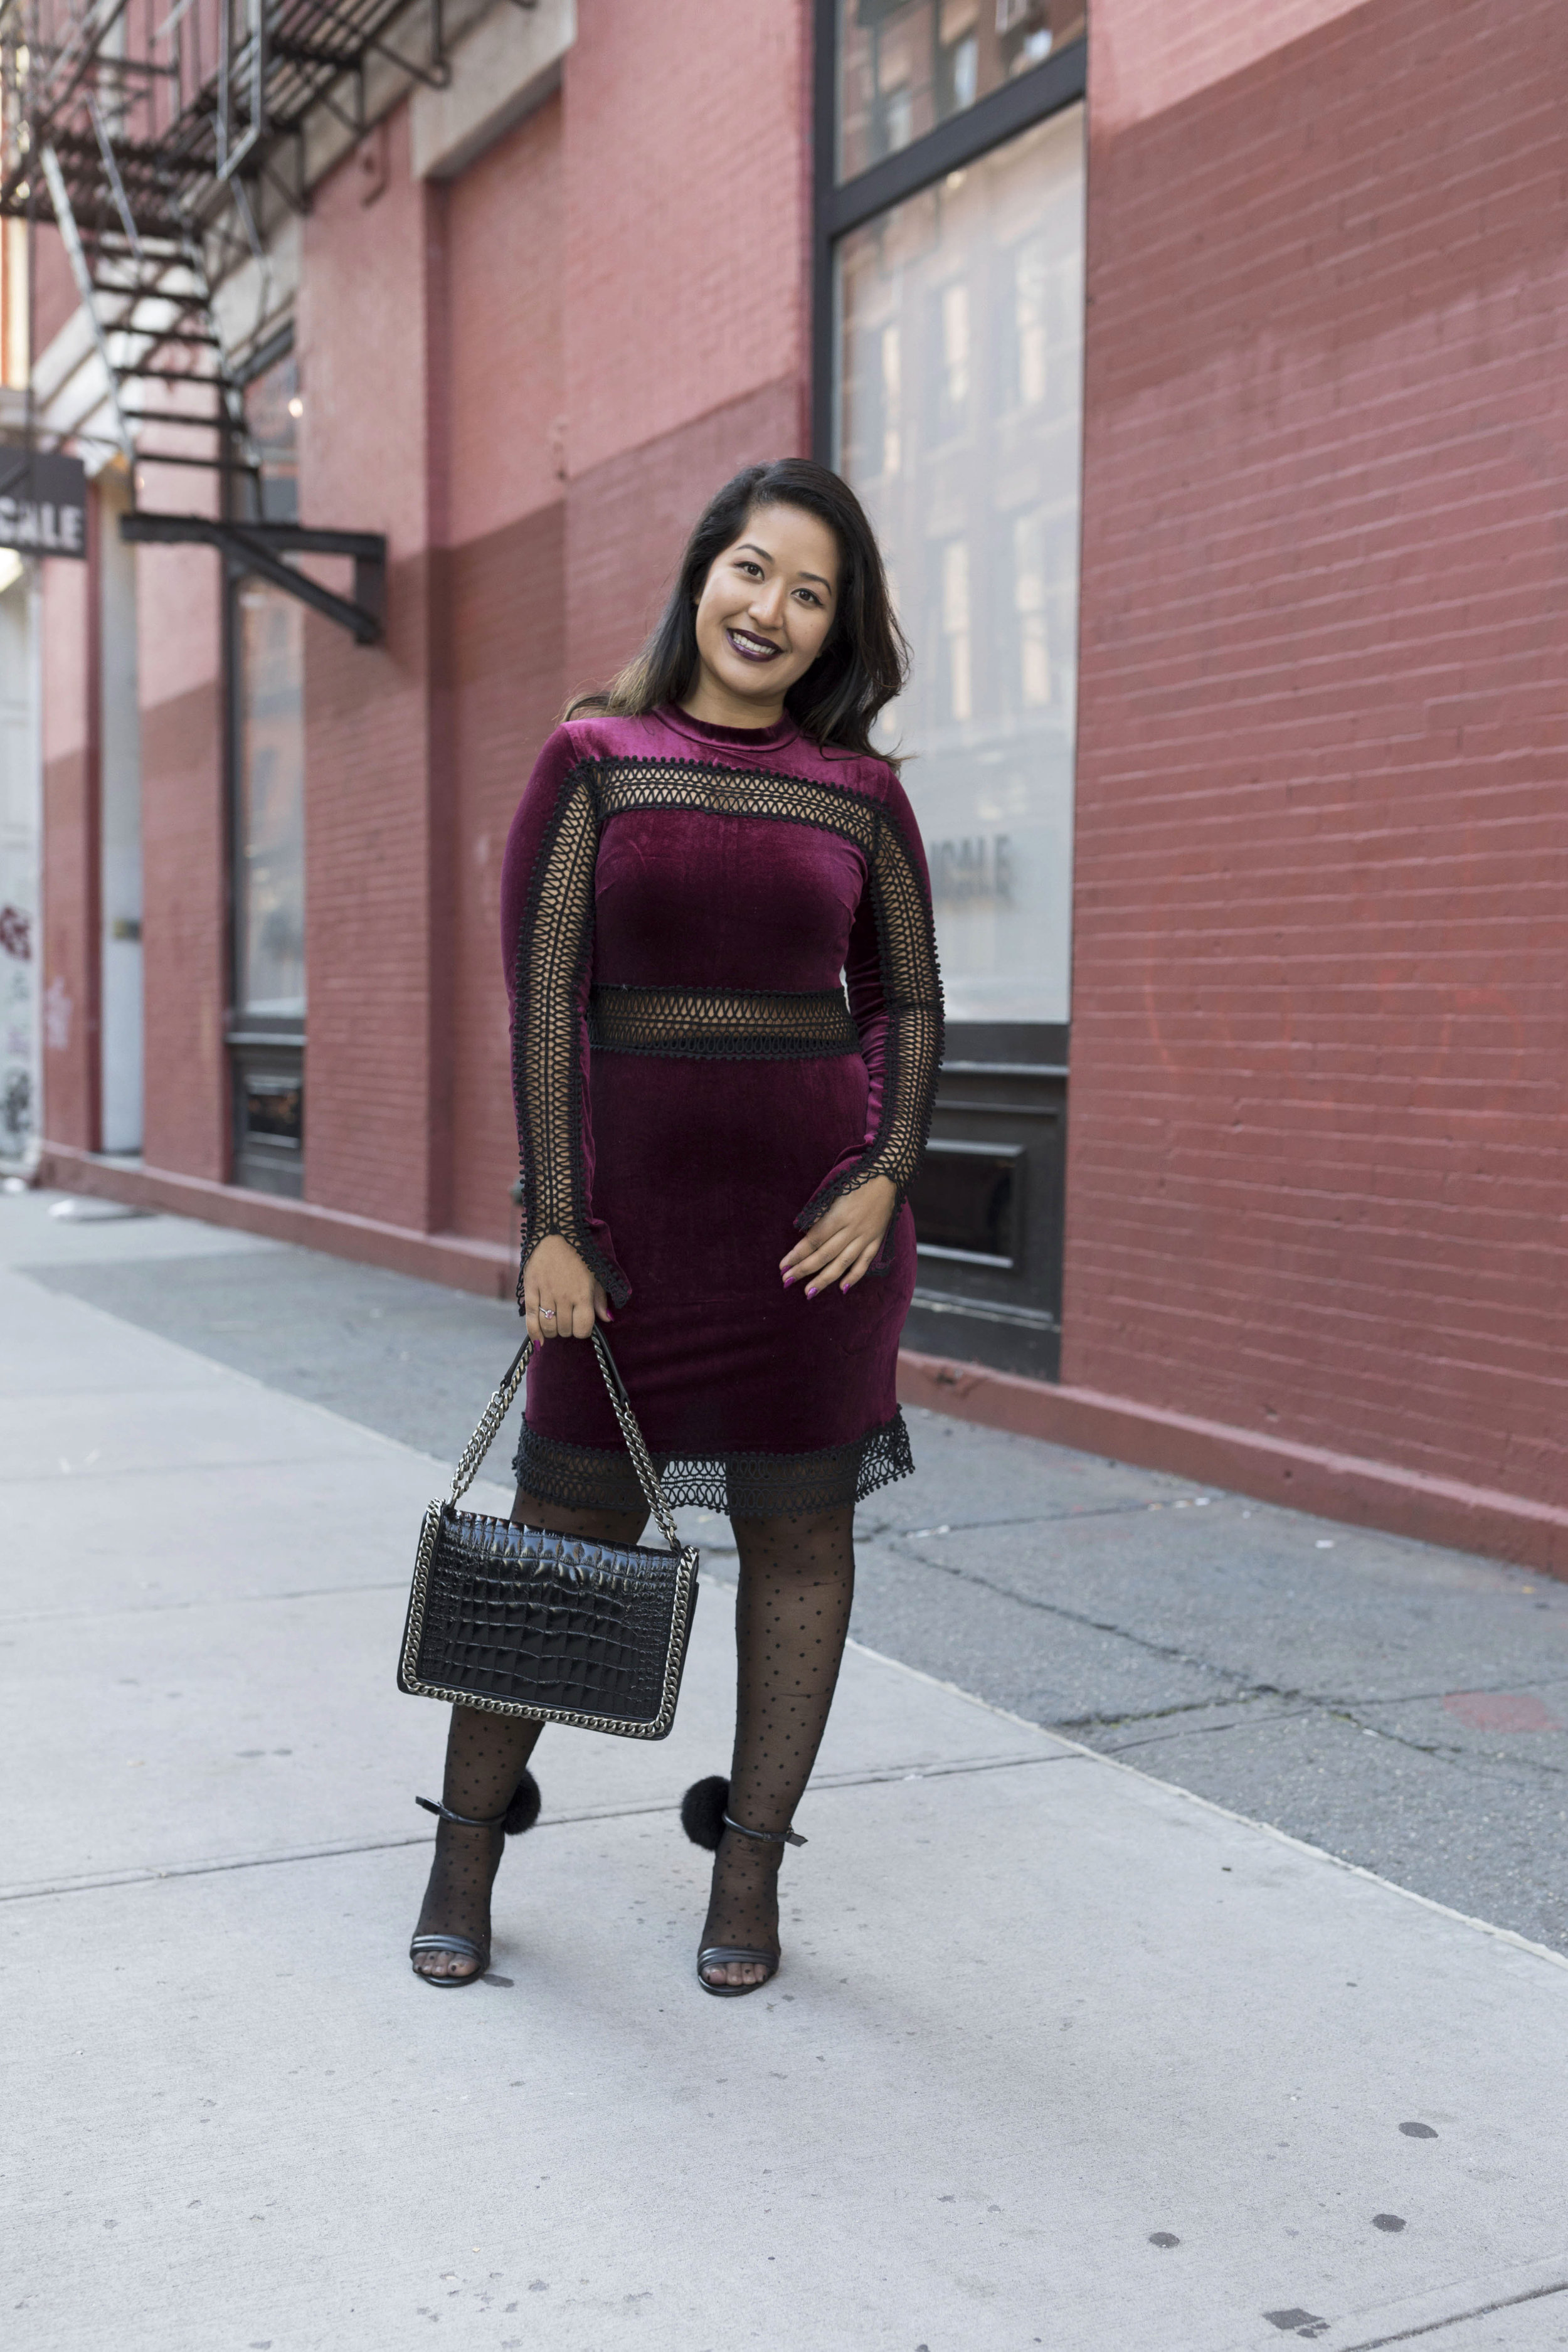 Krity S x Holiday Outfit x Century 21 Burgundy Velvet Dress and Faux Fur9.jpg